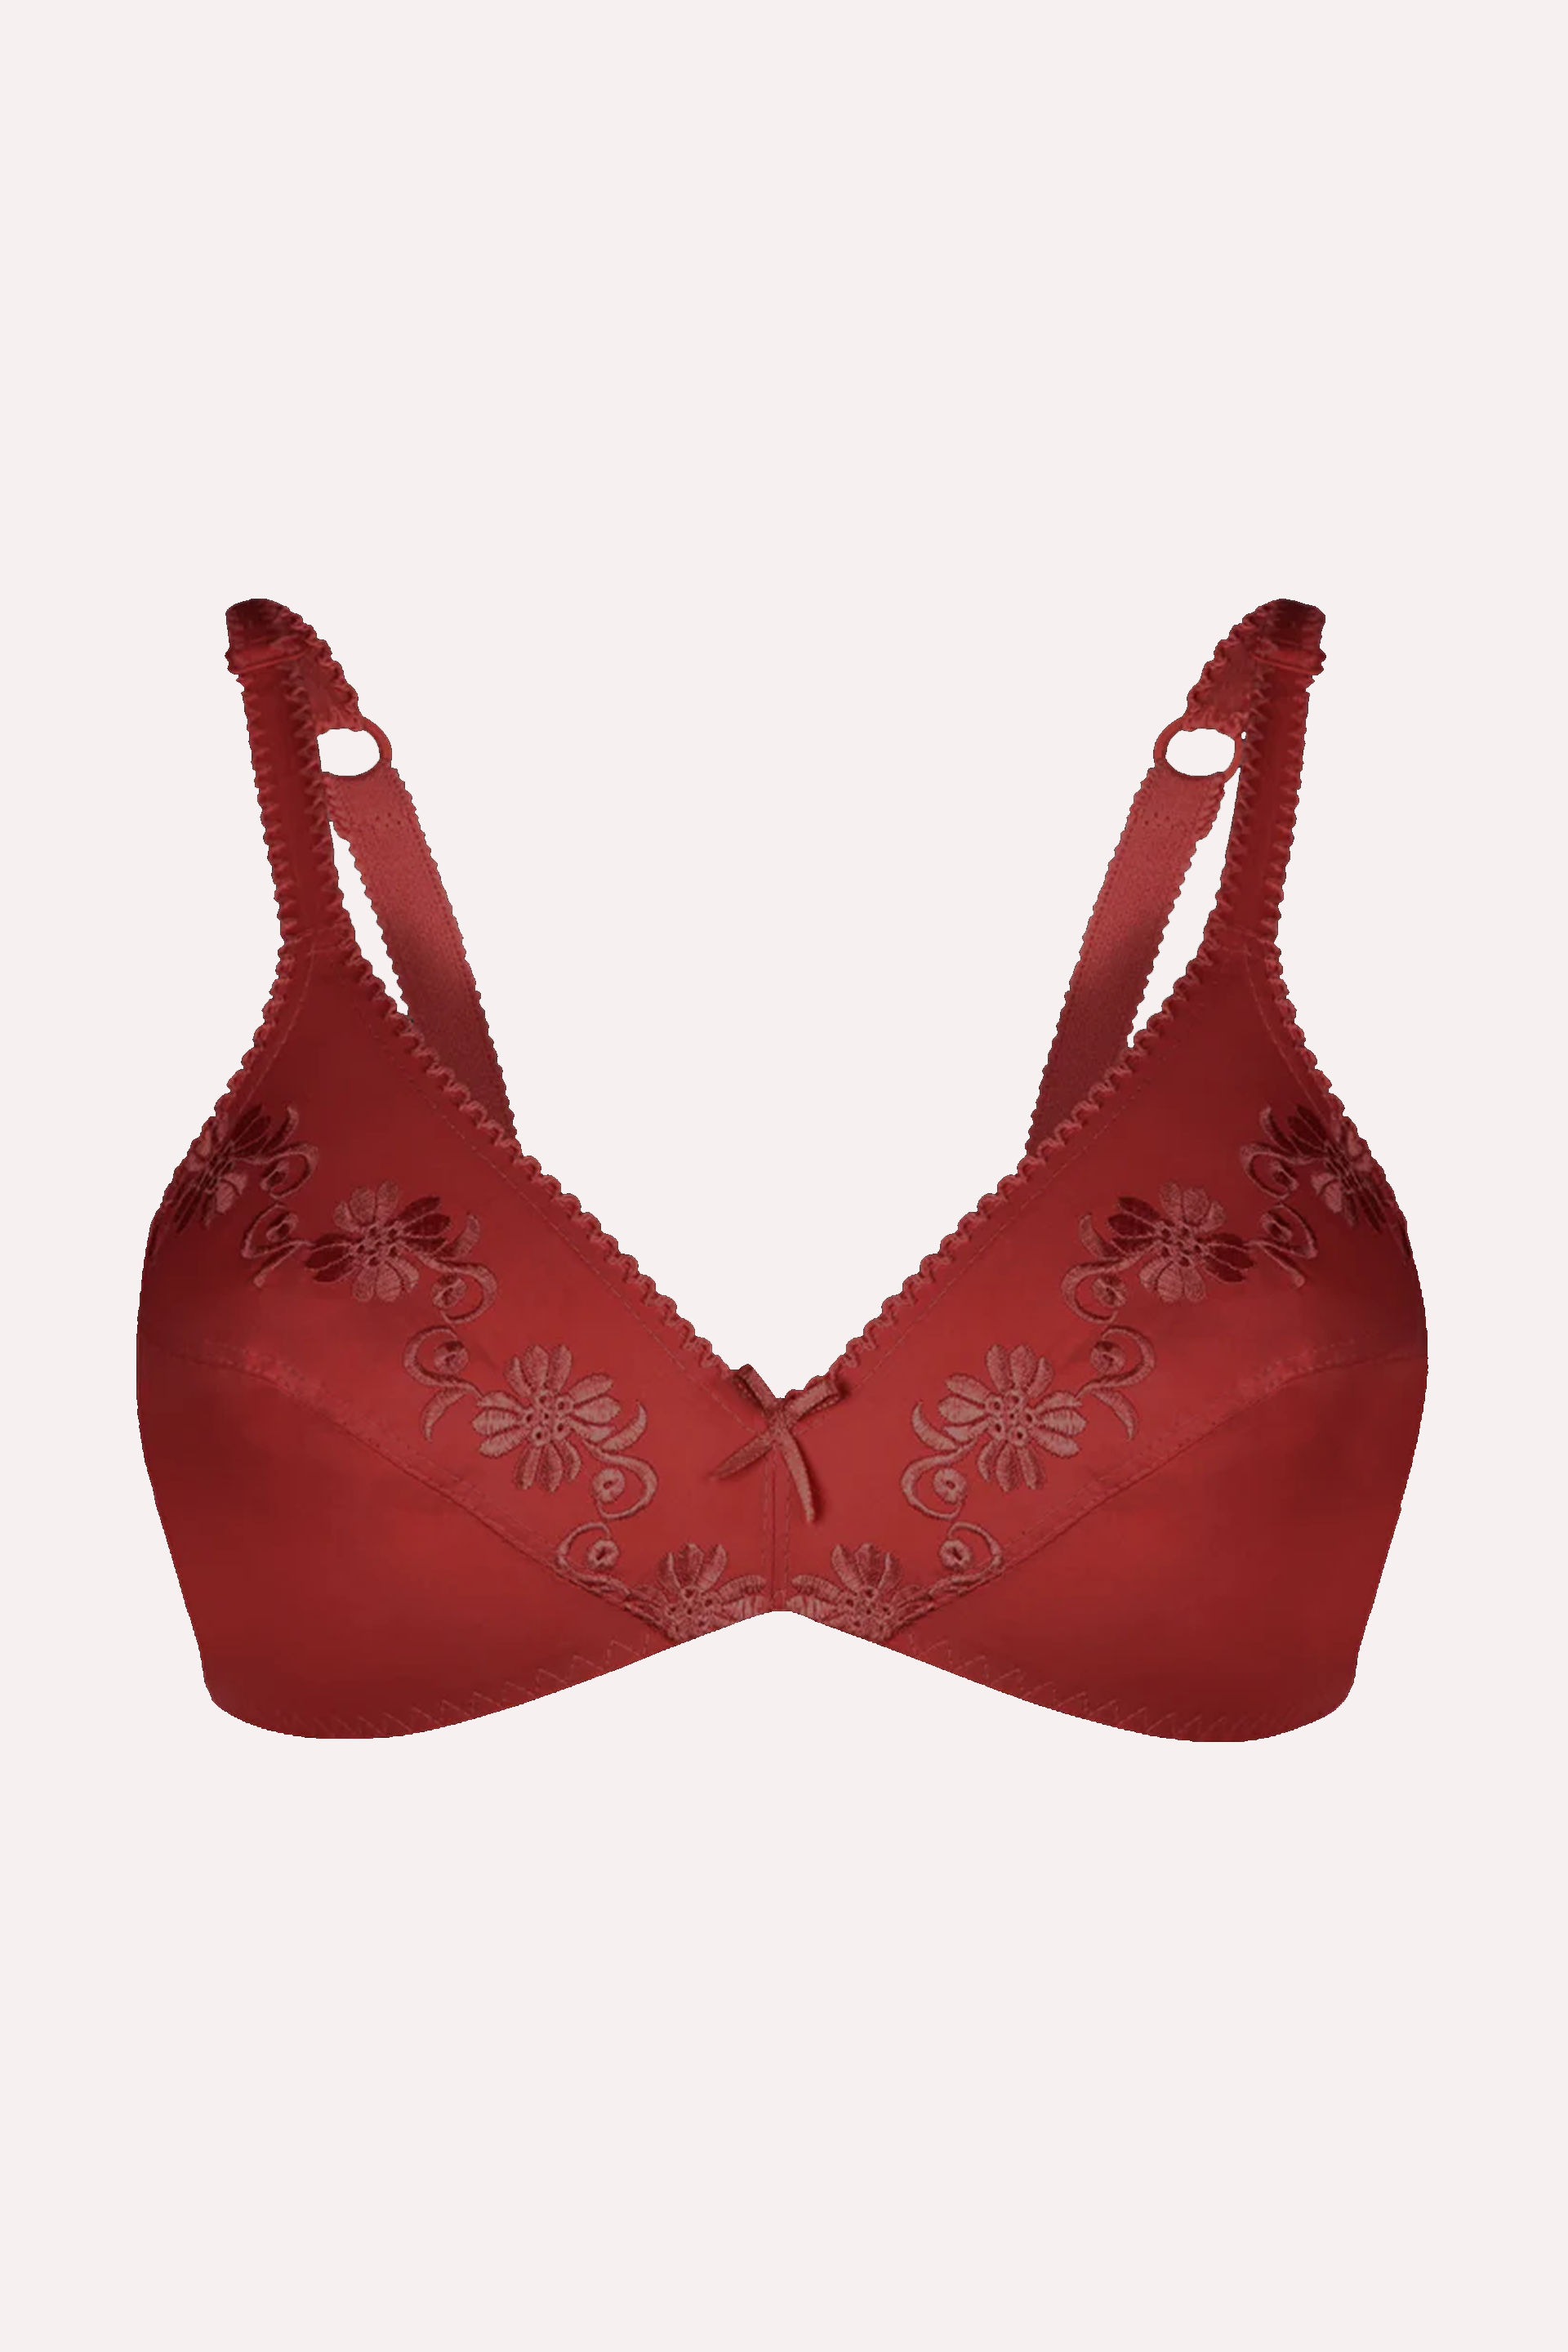 Premium Bra  Buy Embroidery And Daily wear Bra Designs in